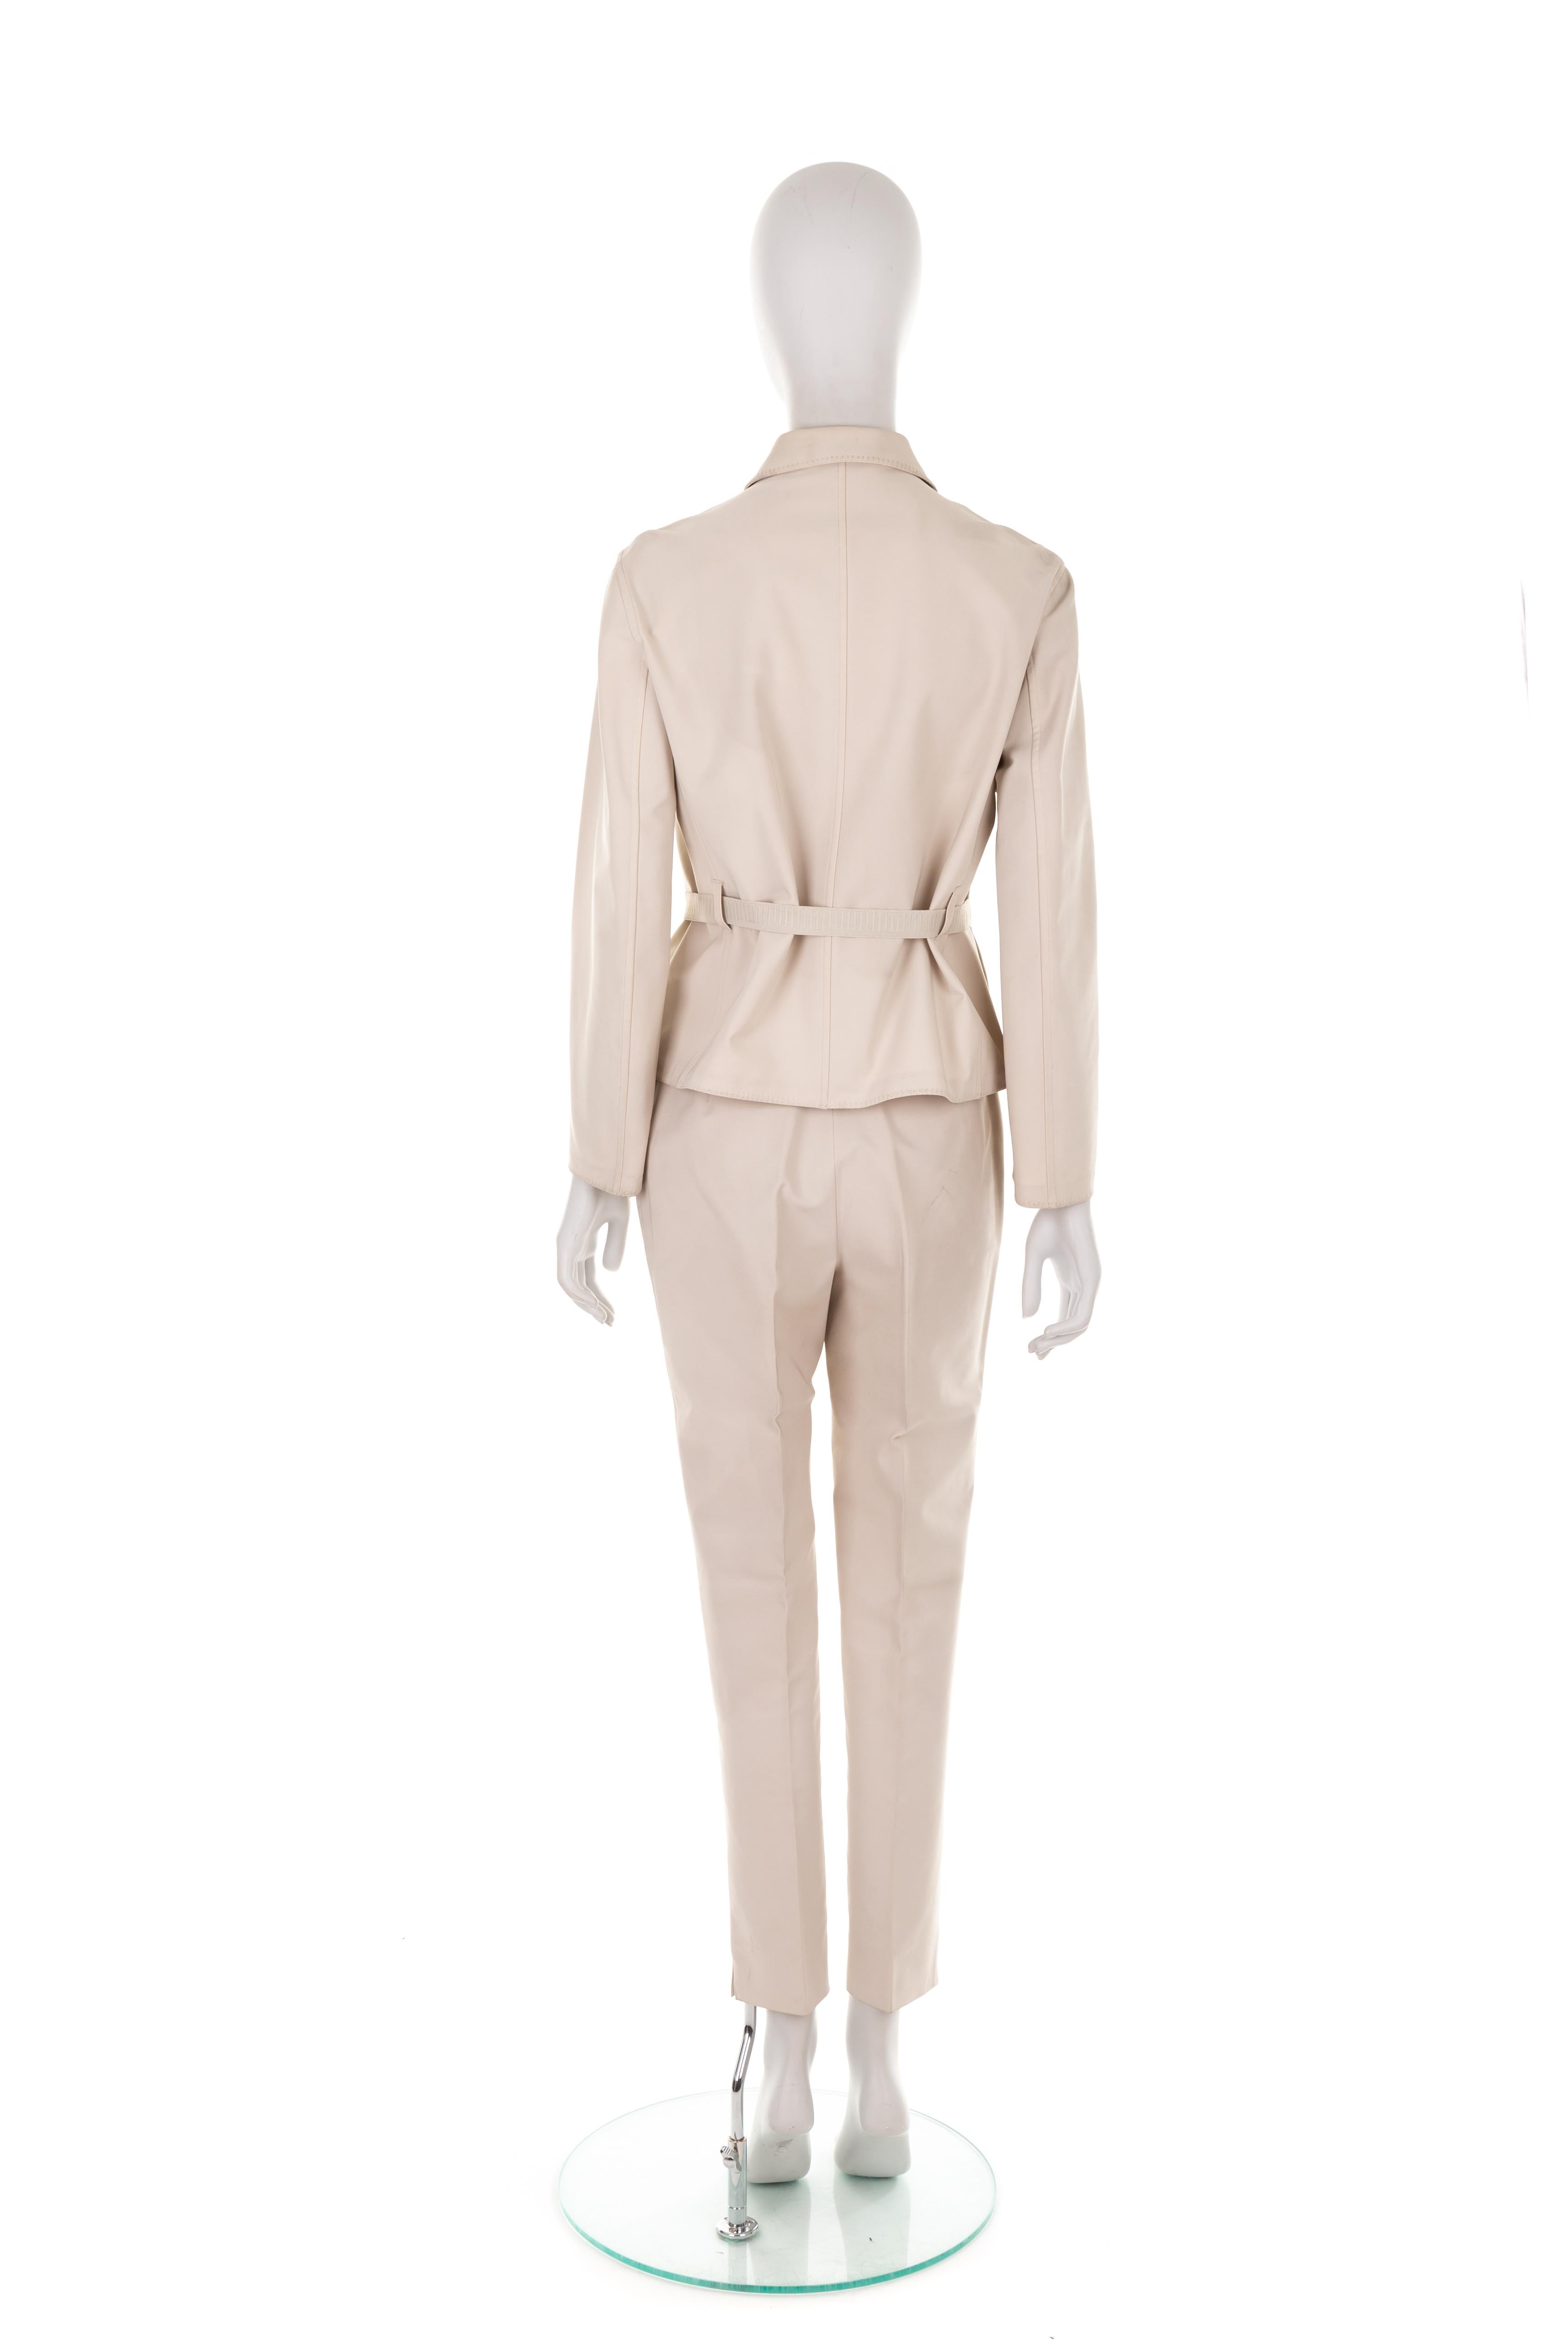 Prada S/S 1998 off-white pant suit with clip logo belt In Excellent Condition For Sale In Rome, IT